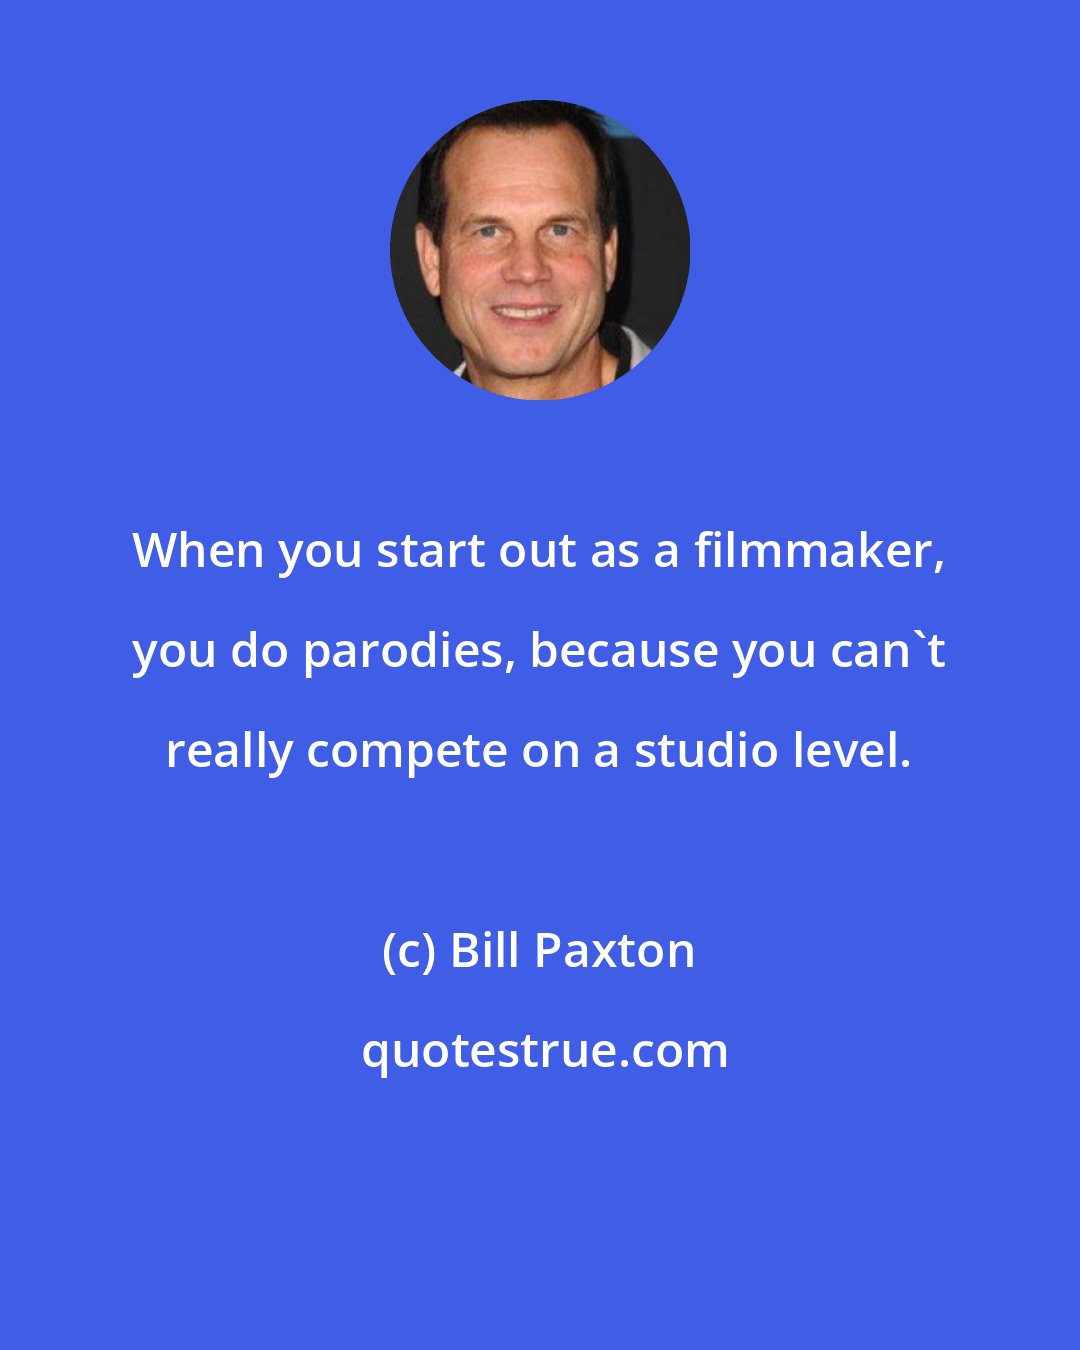 Bill Paxton: When you start out as a filmmaker, you do parodies, because you can't really compete on a studio level.